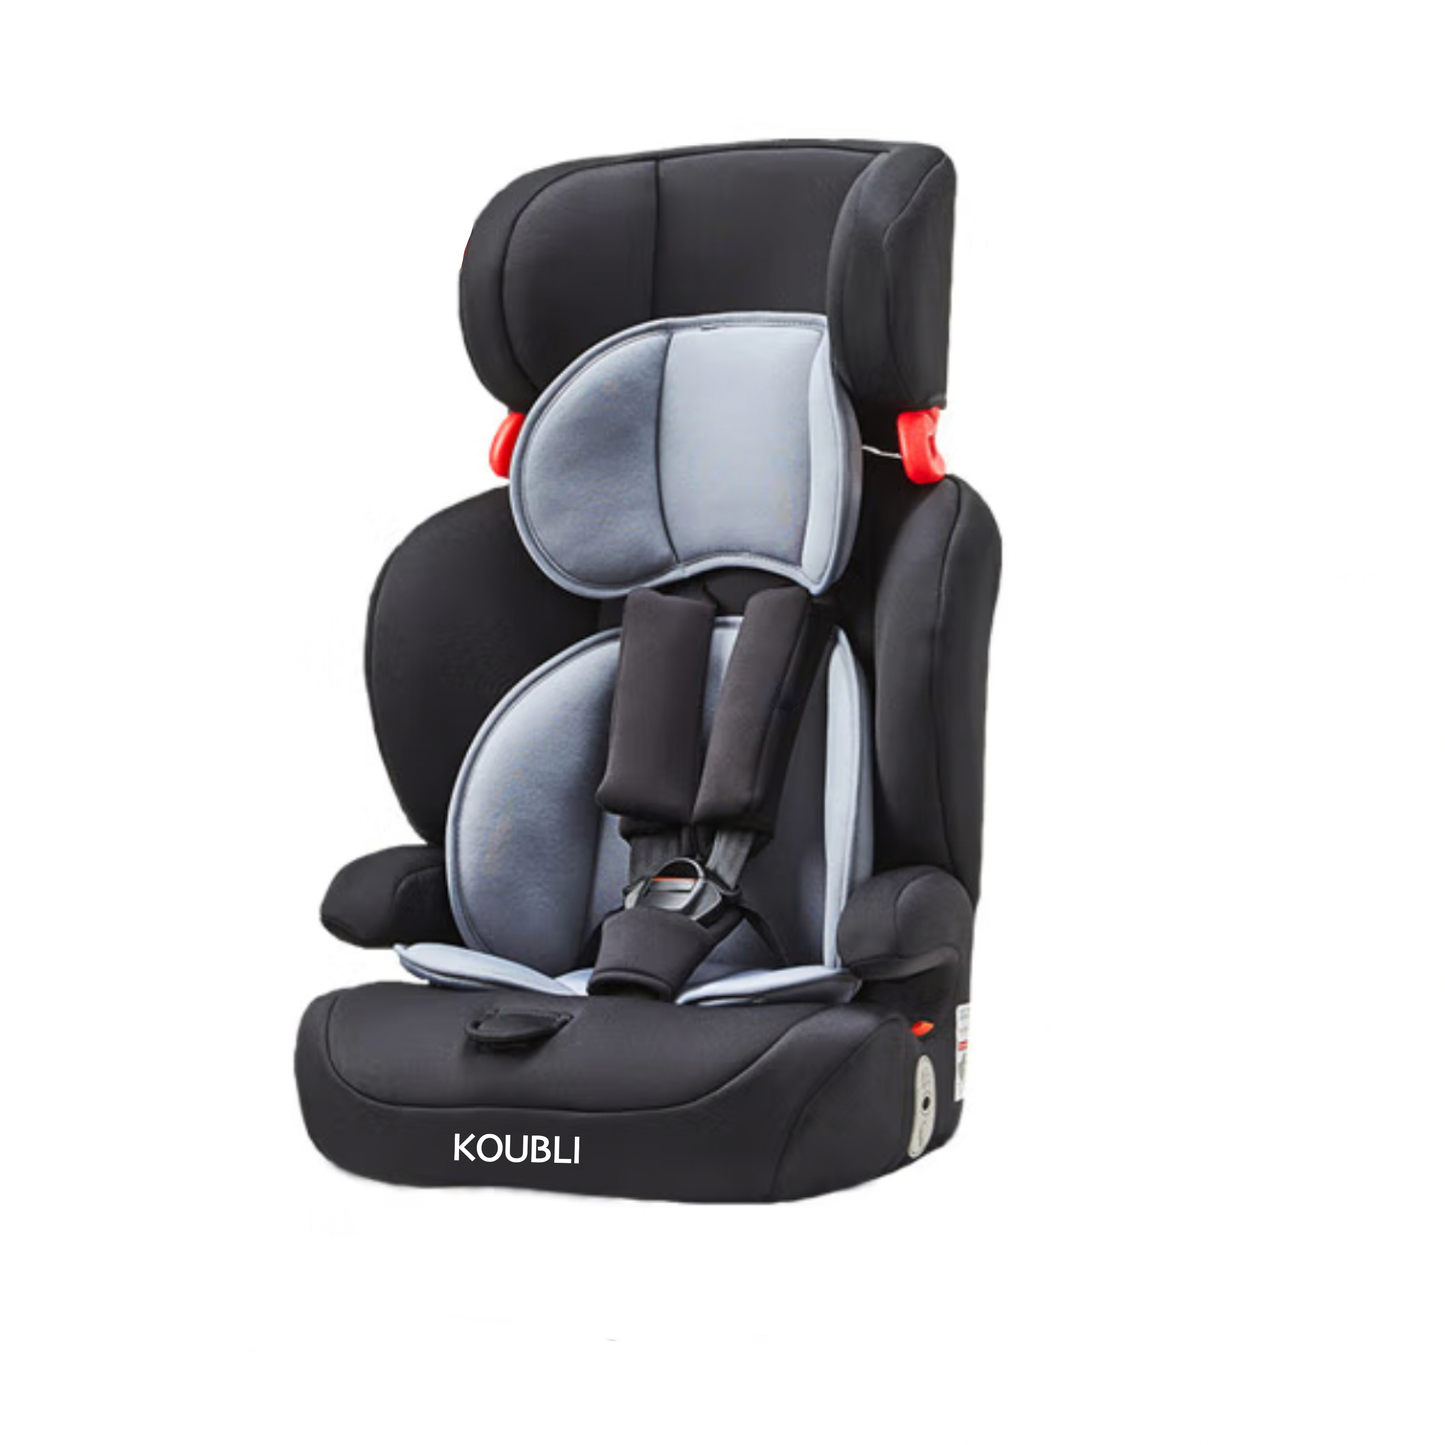 KOUBLI Cup Holders for Vehicles Safety Belts for Vehicle Seats